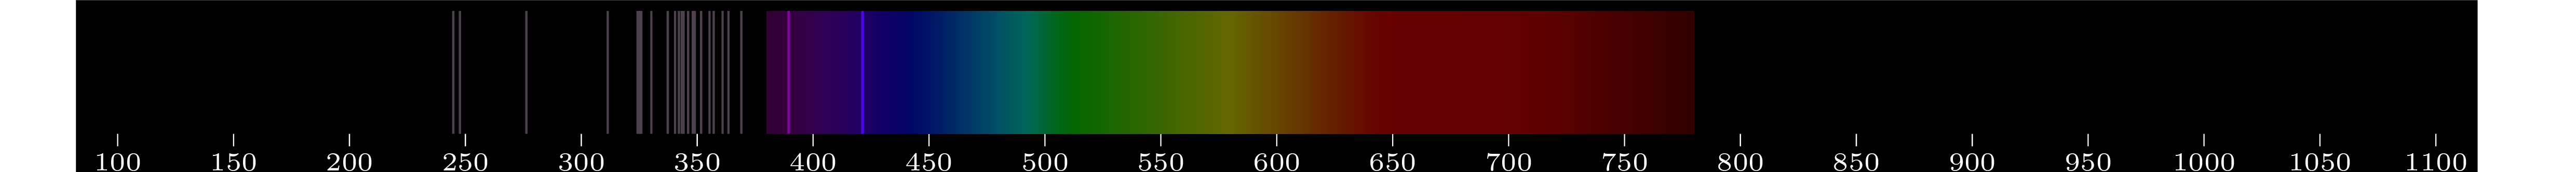 emmision spectra of element Pd